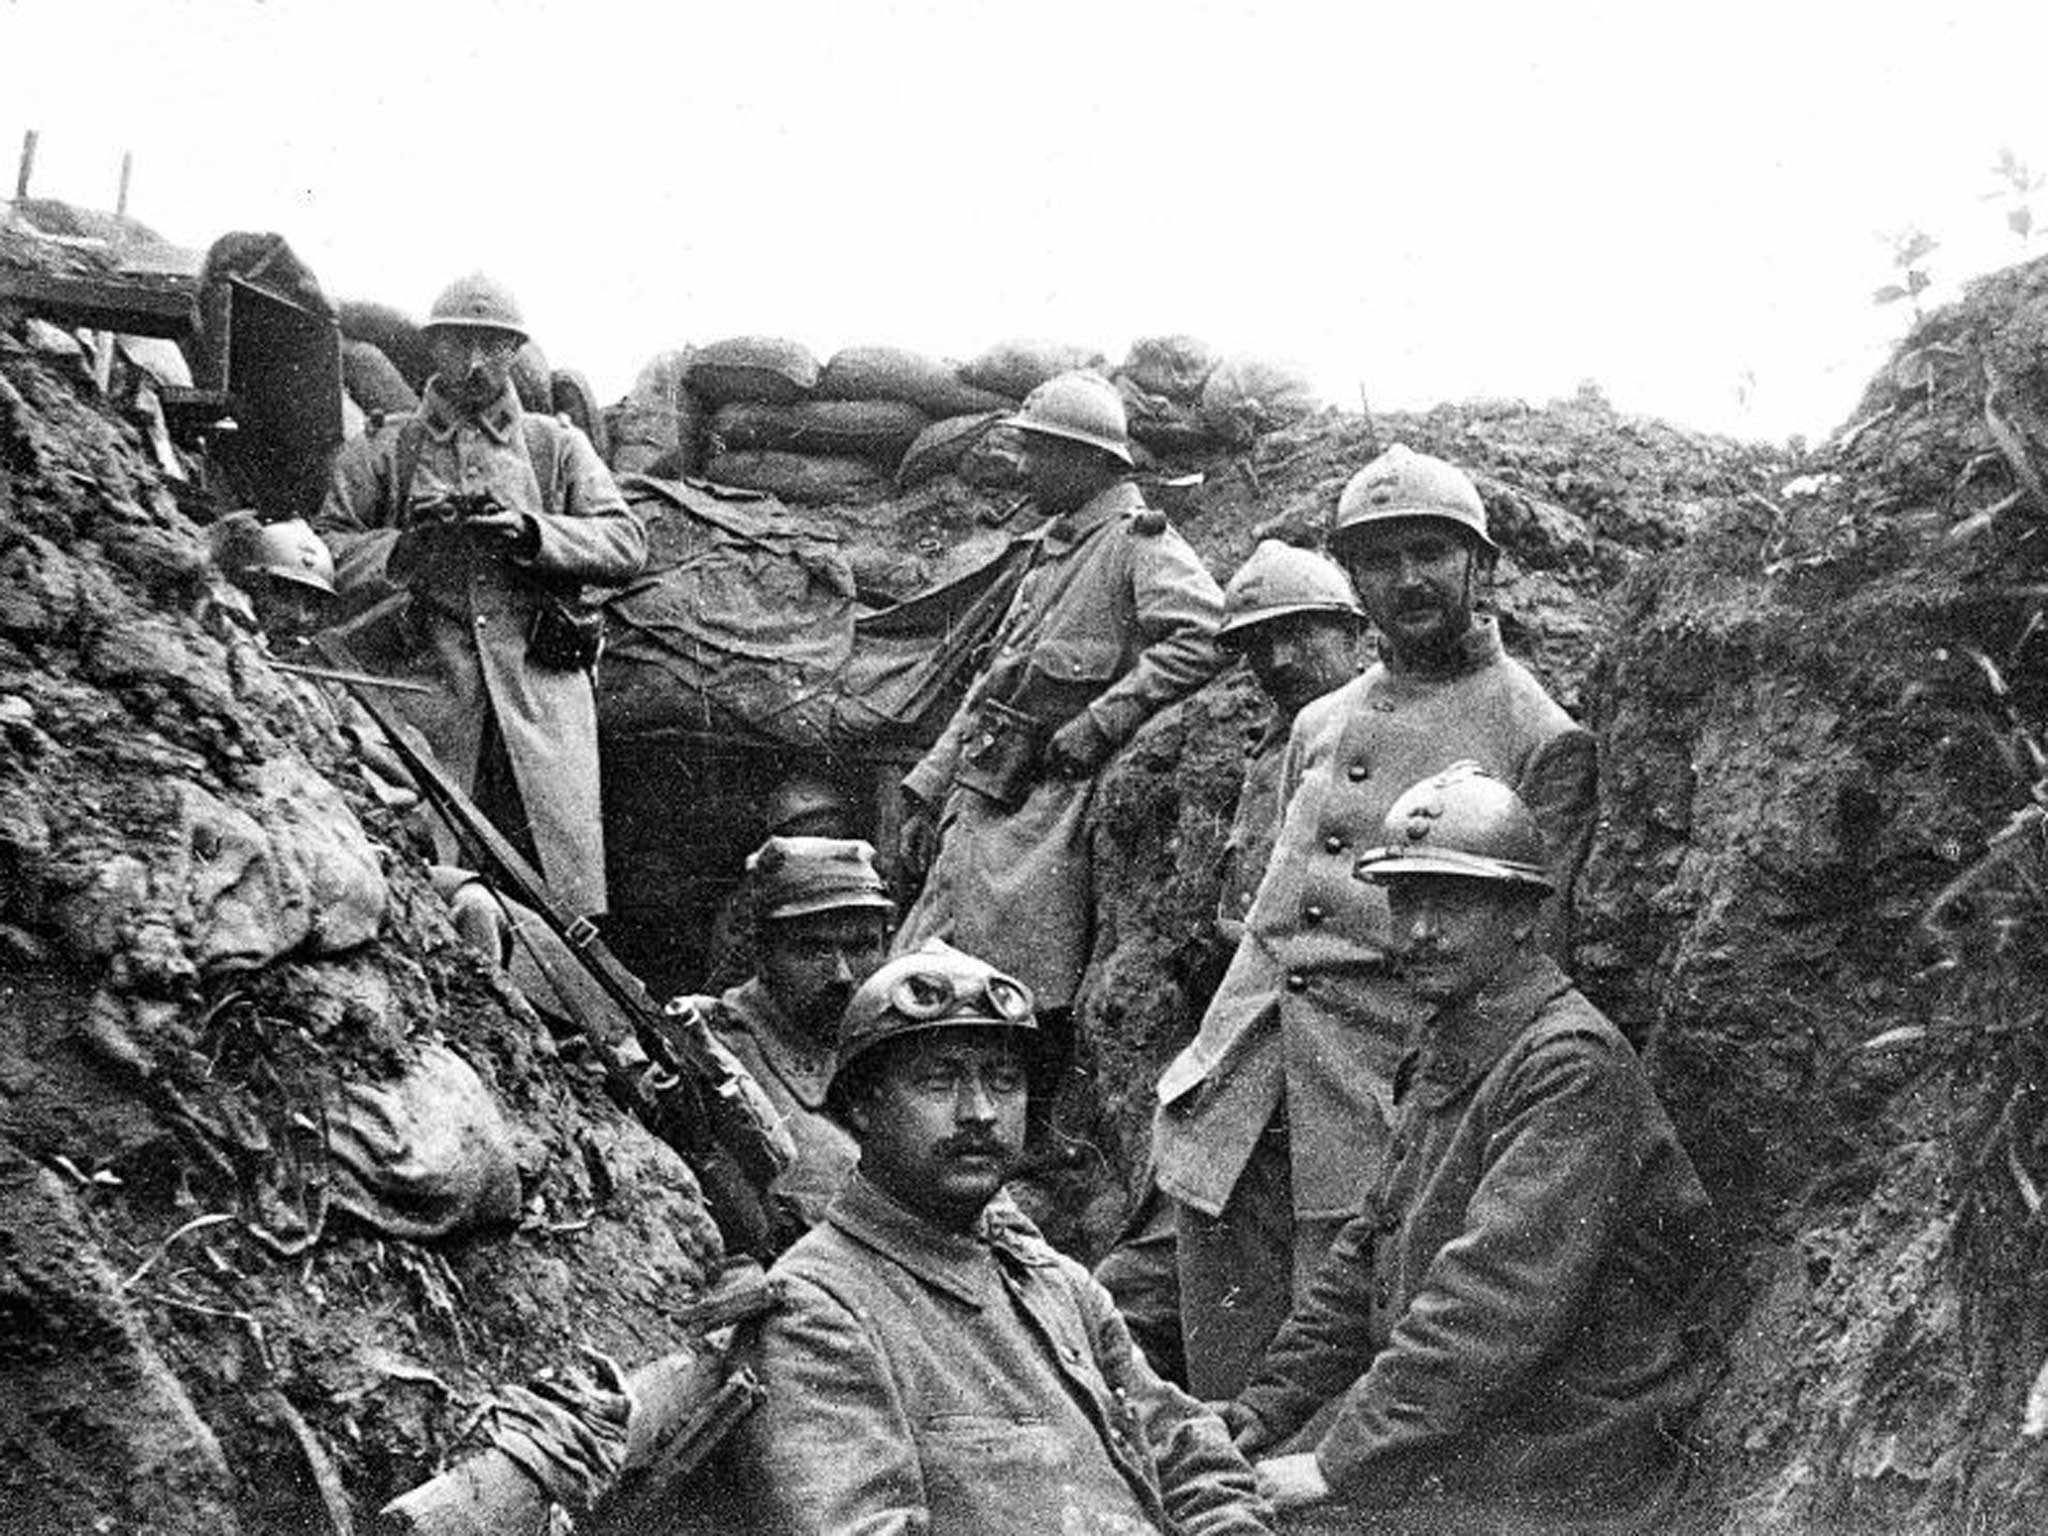 One of the trenches from which deserters tried to escape